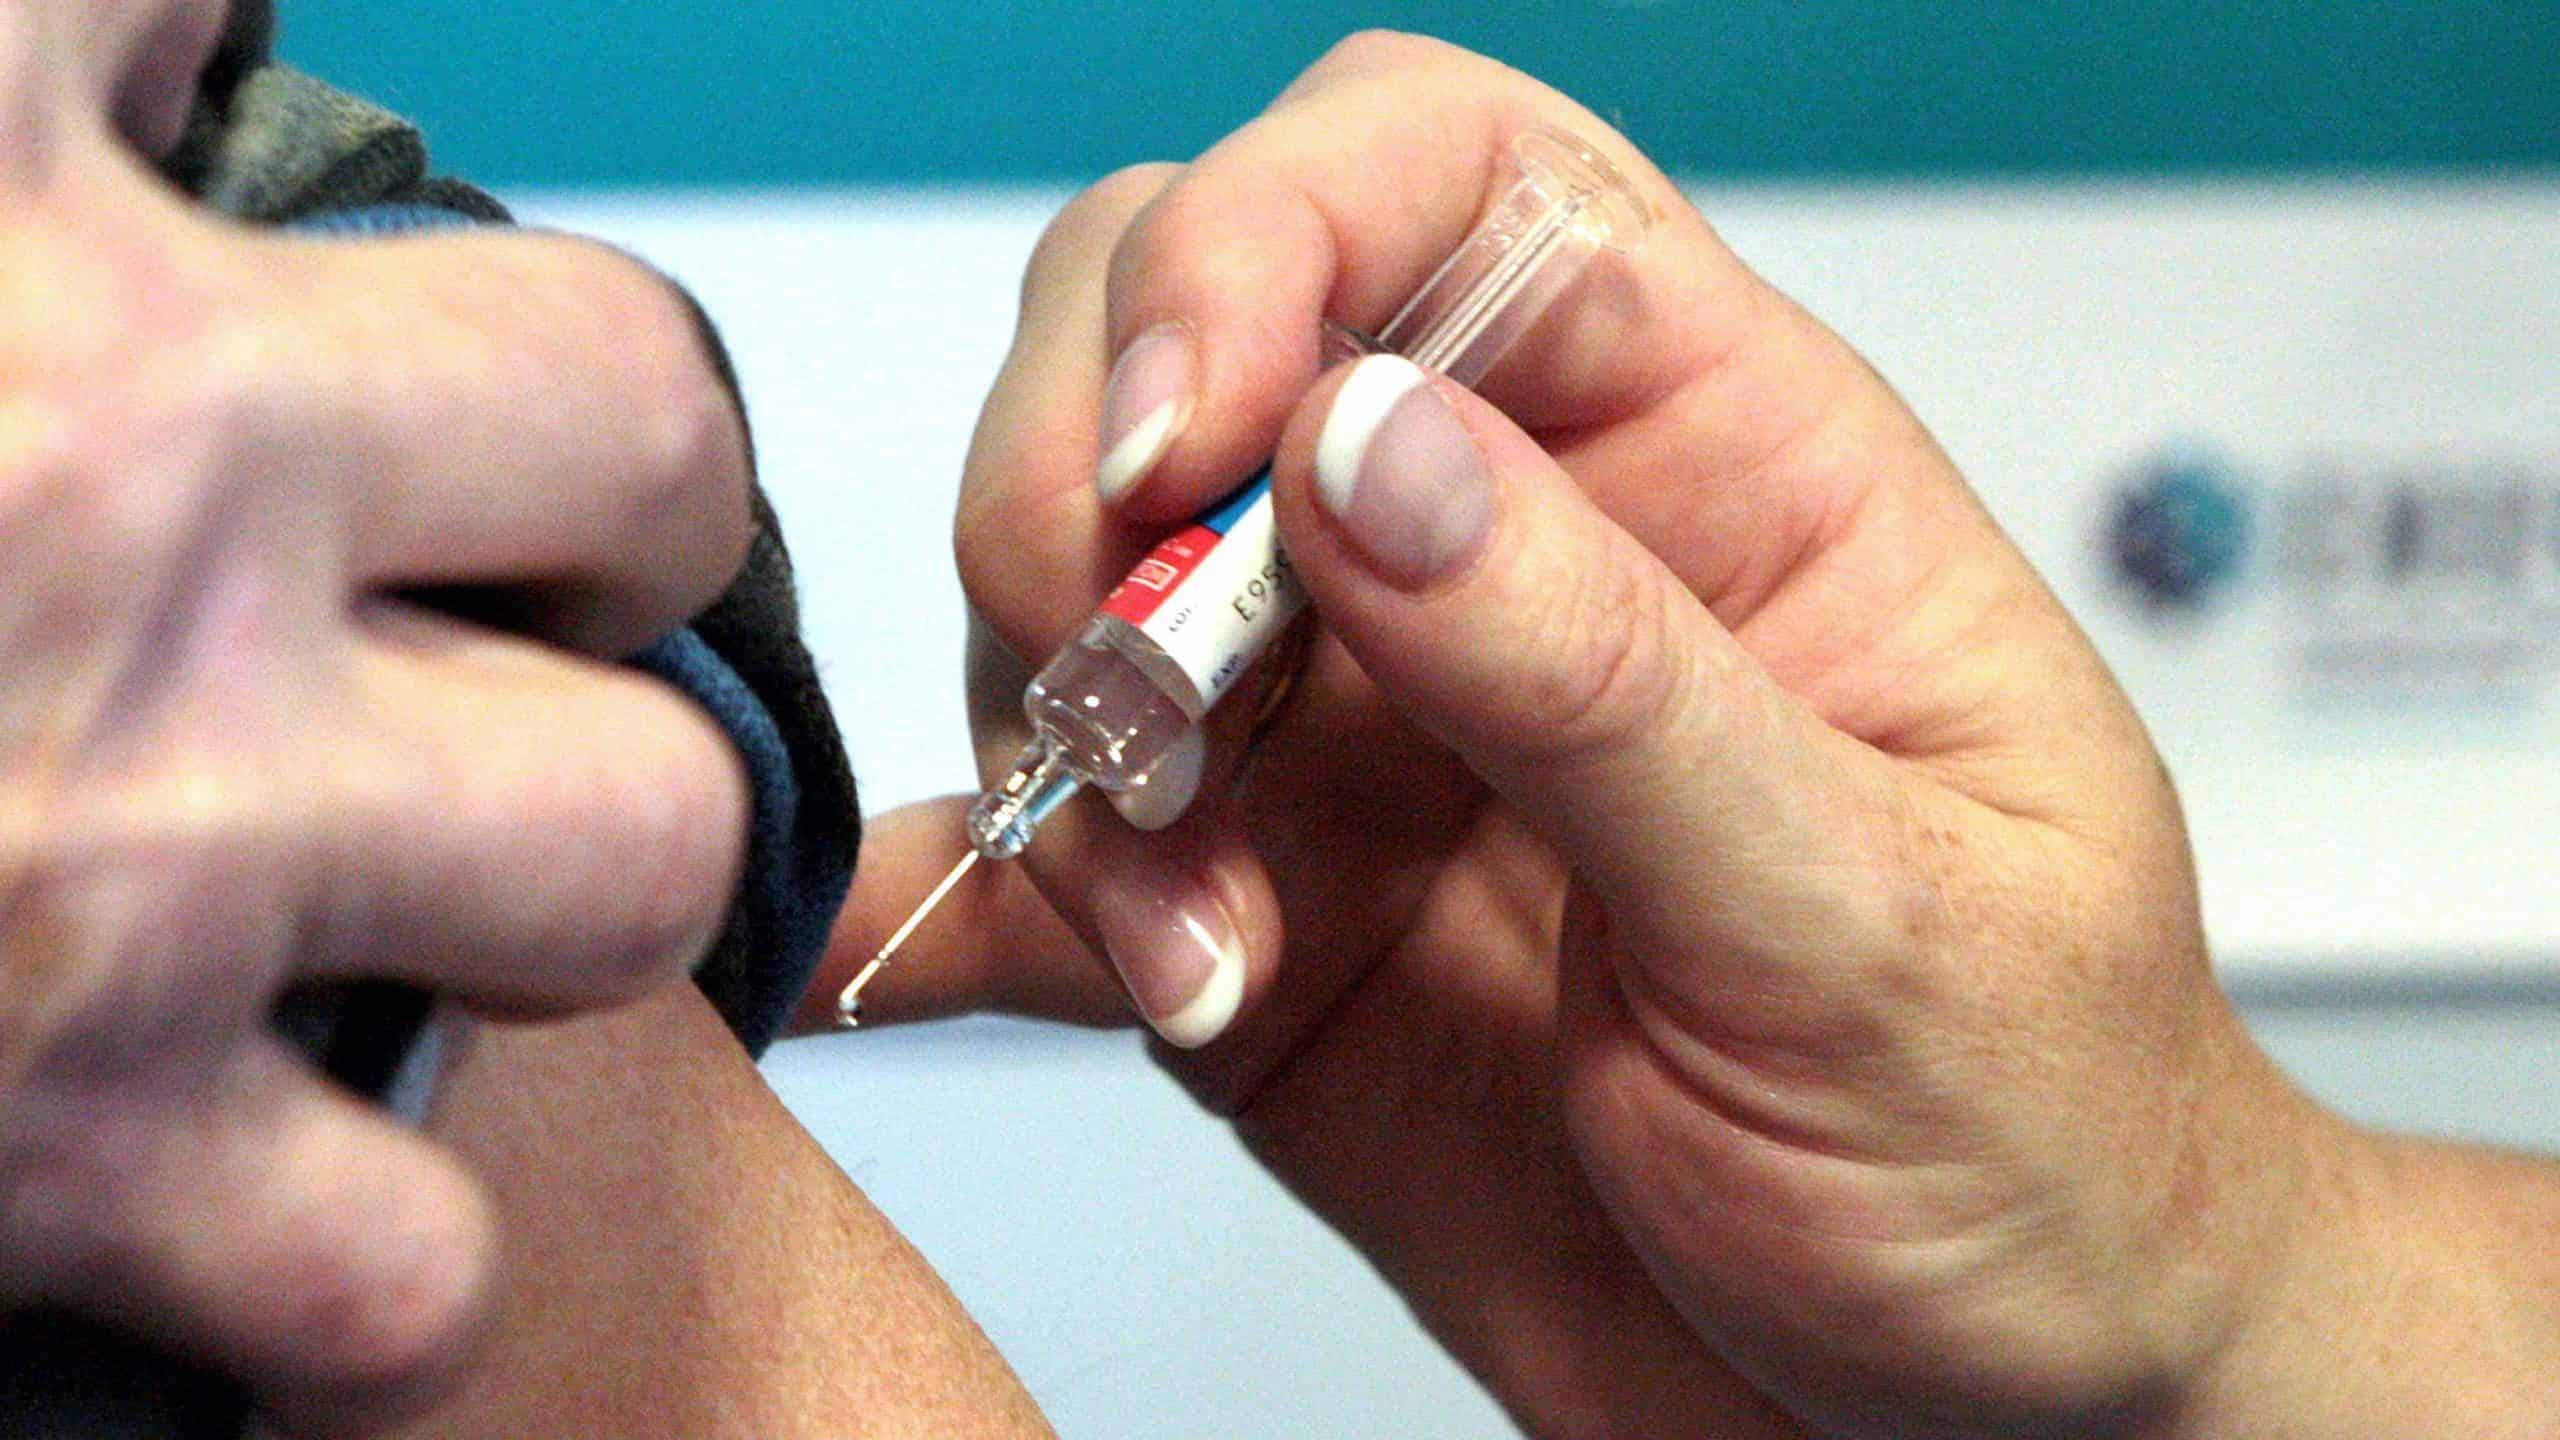 35% of Americans say they won’t get vaccinated when one becomes available